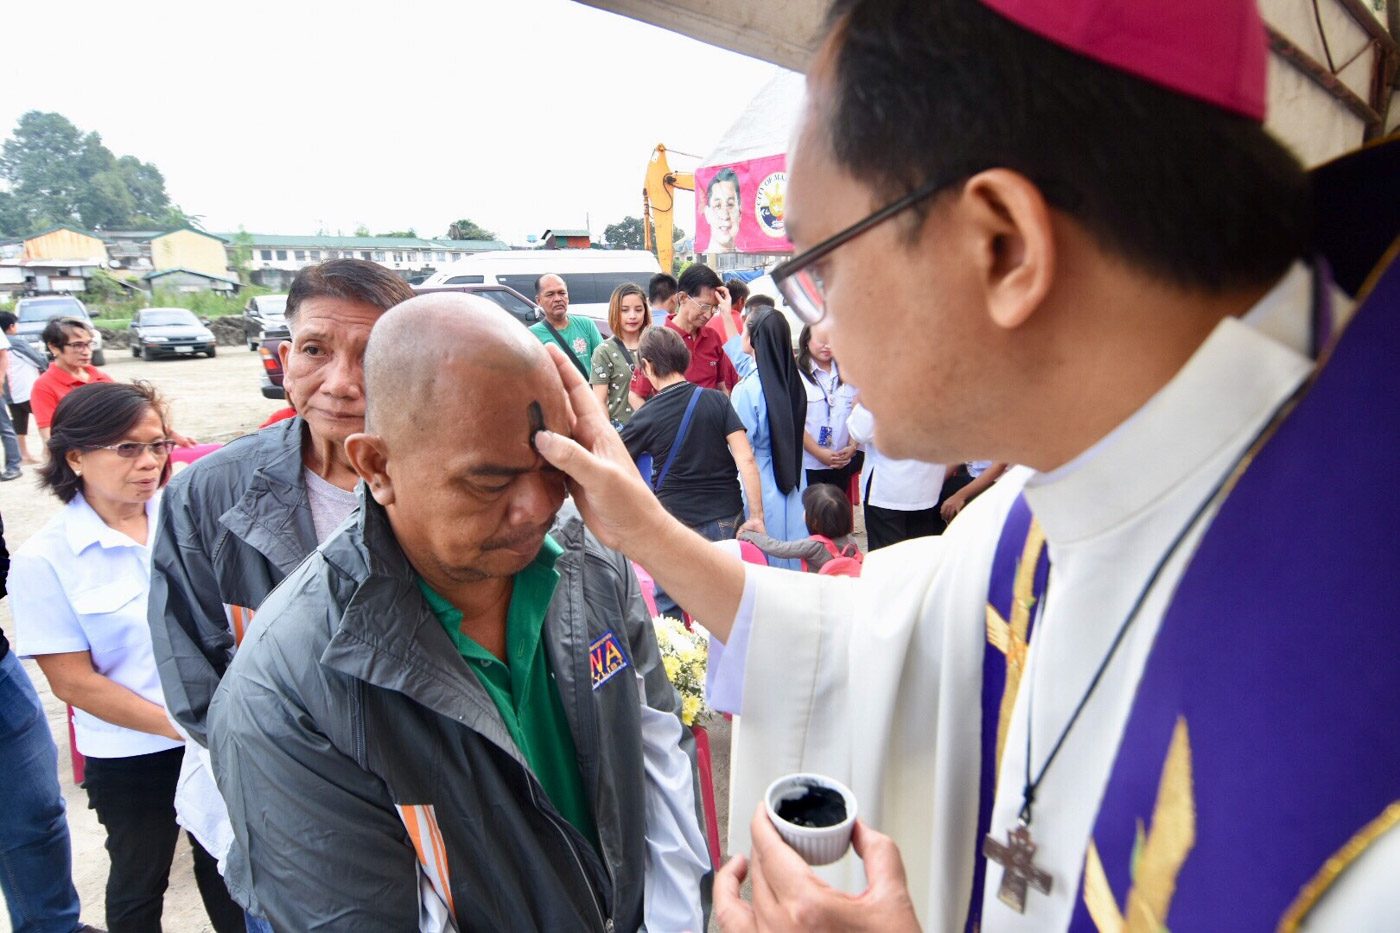 ASH WEDNESDAY. Caloocan Bishop Pablo Virgilio David marks foreheads with ashes during the Ash Wednesday Mass on February 14, 2018, in a relocation site in Malabon. Photo by Angie de Silva/Rappler 